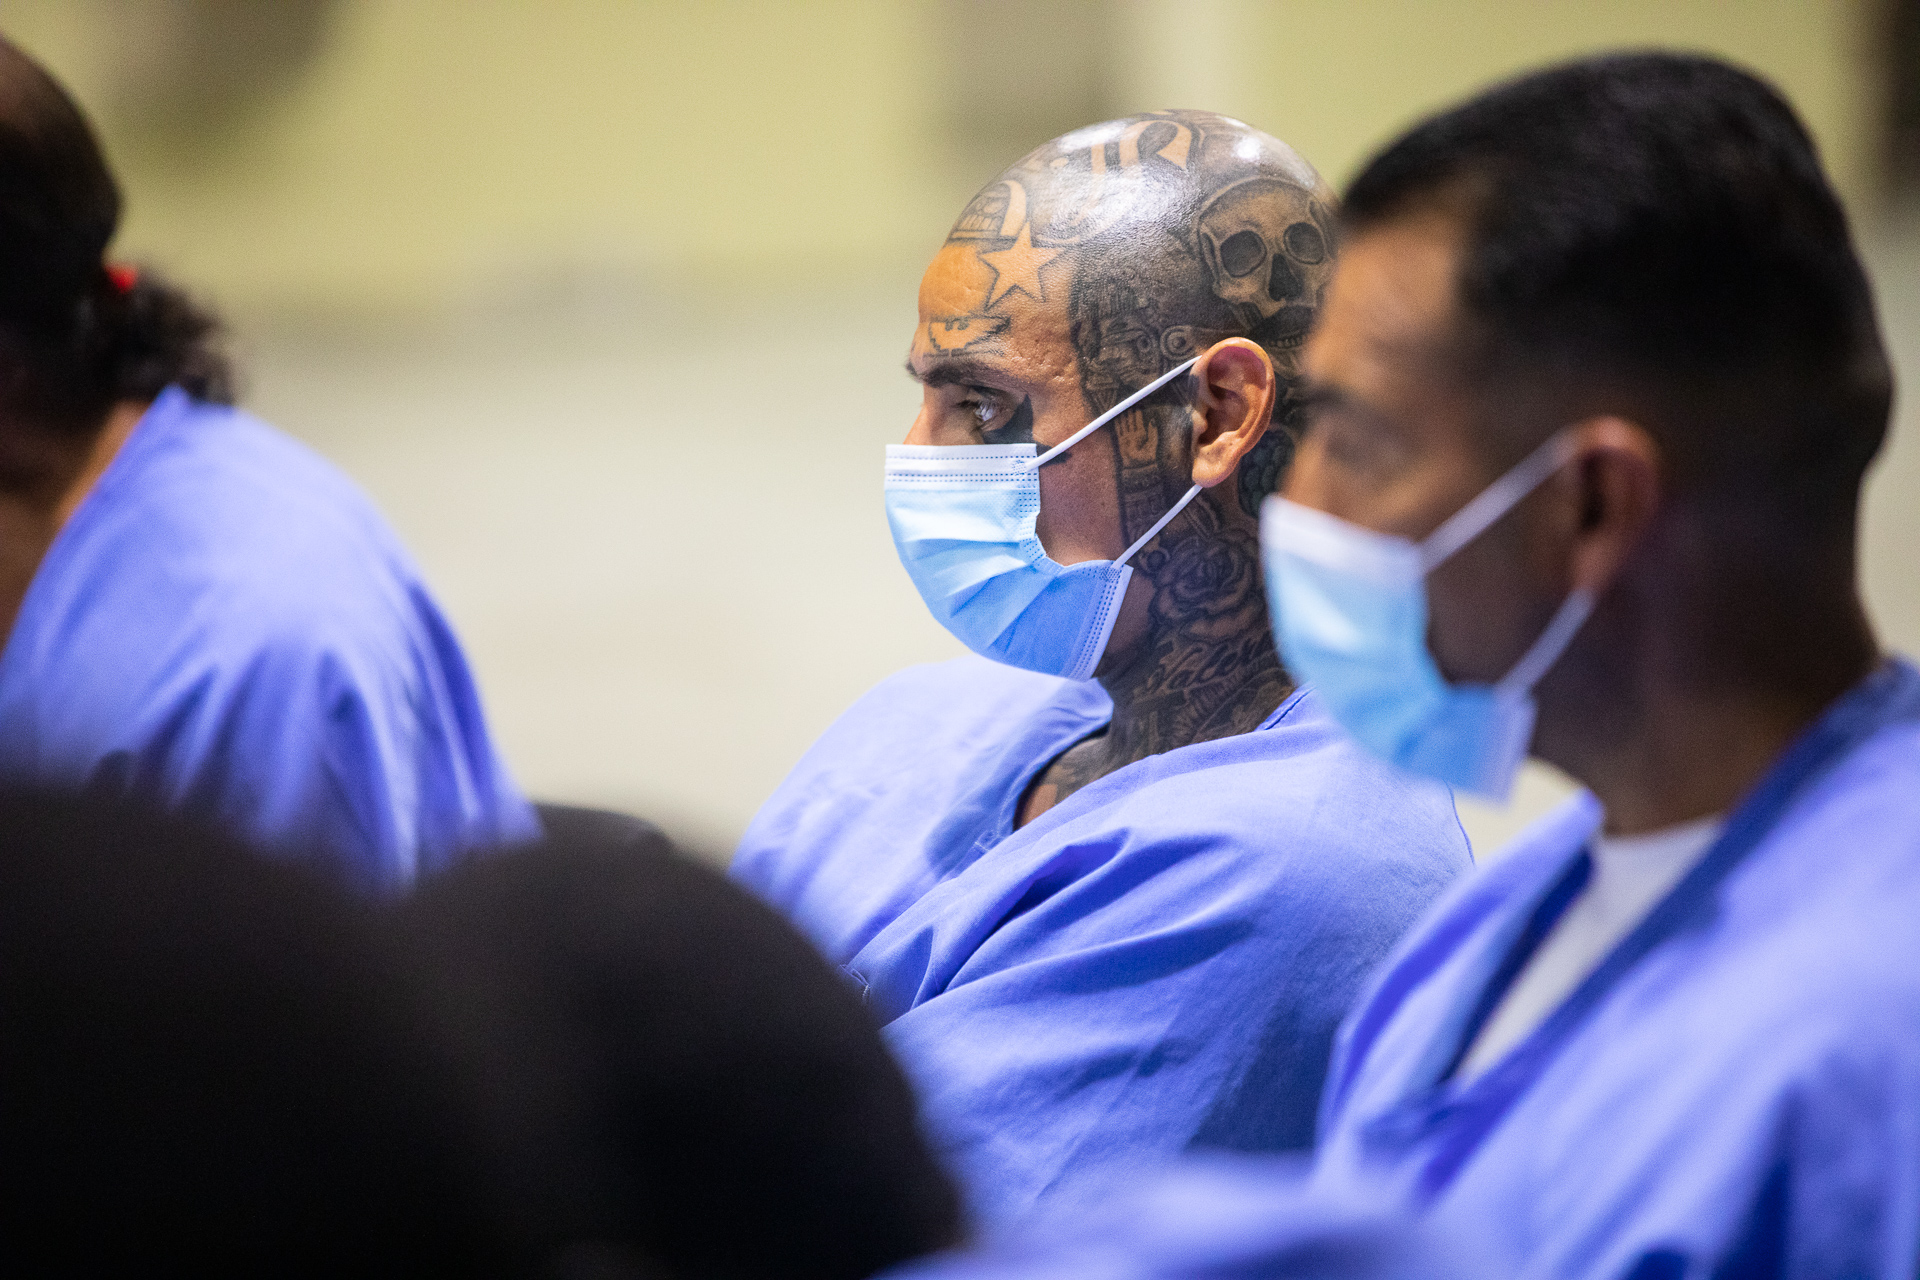 An inmate, who has tattoos on his face, at Folsom Prison sits in a circle of other inmates and participants in a restorative justice program workshop.